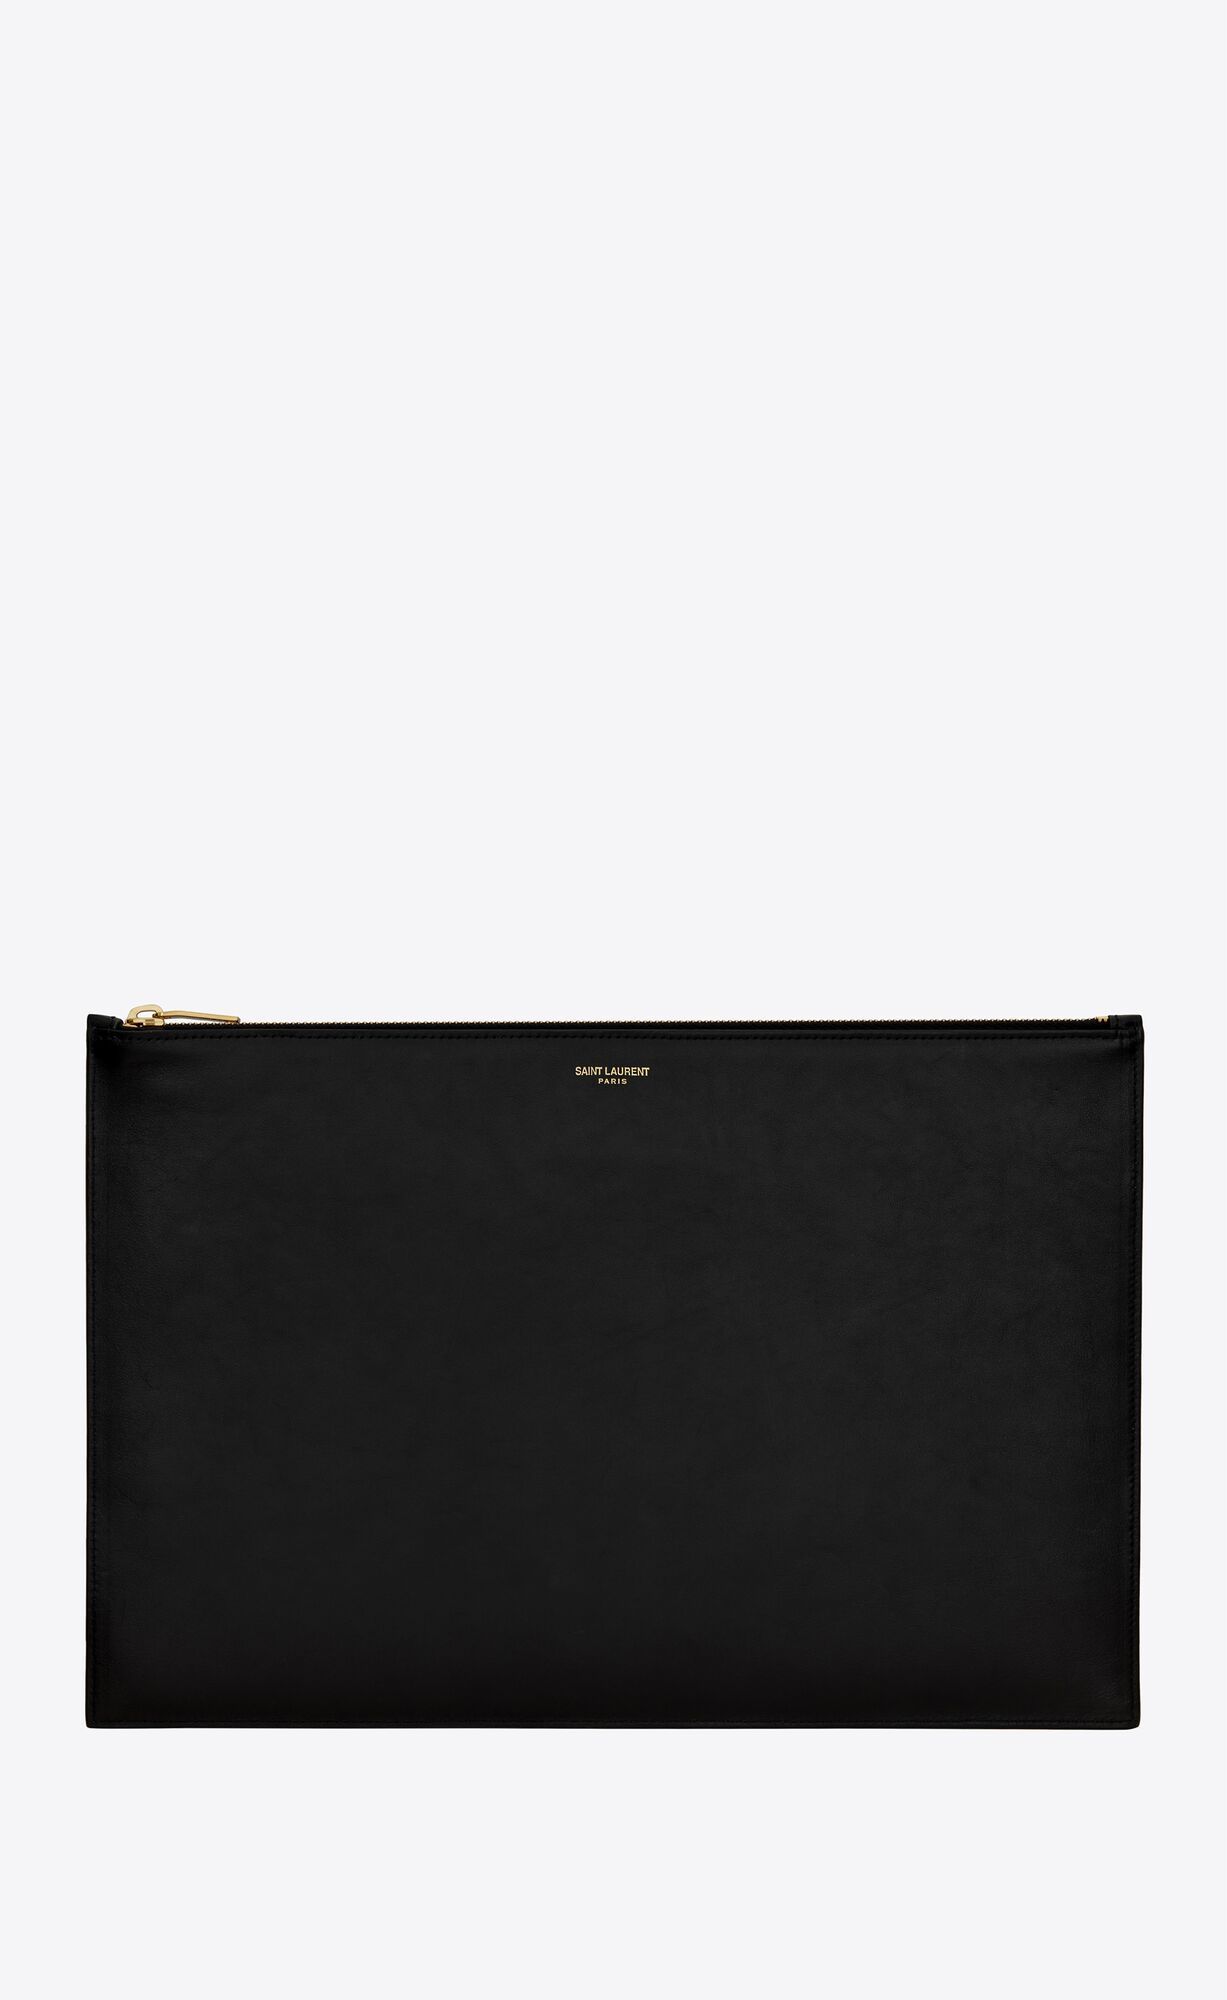 SAINT LAURENT XL flat pouch in shiny leather | Saint Laurent __locale_country__ | YSL.com | Saint Laurent Inc. (Global)